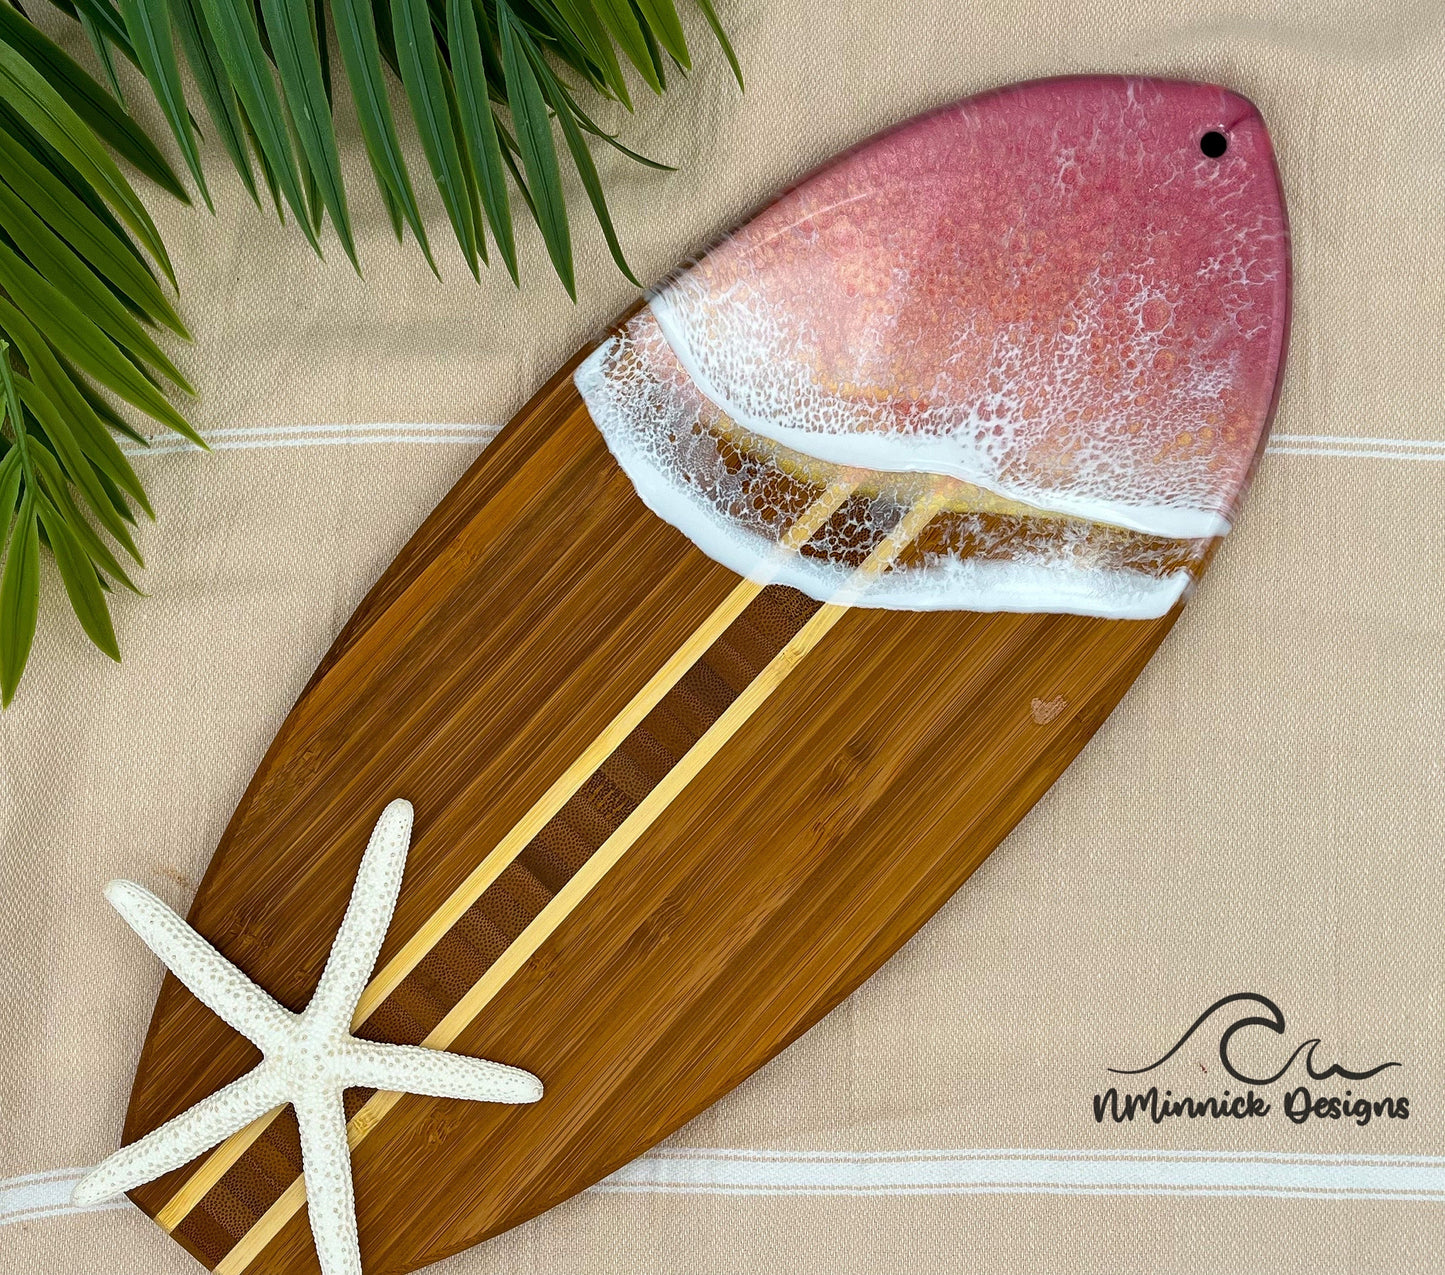 Surfboard-shaped bamboo cutting board with the top third of the board covered in a coral pink and gold tinted ocean resin art resembling the waves of the ocean.  Laying on a tan beach towel next to a natural starfish (not included).